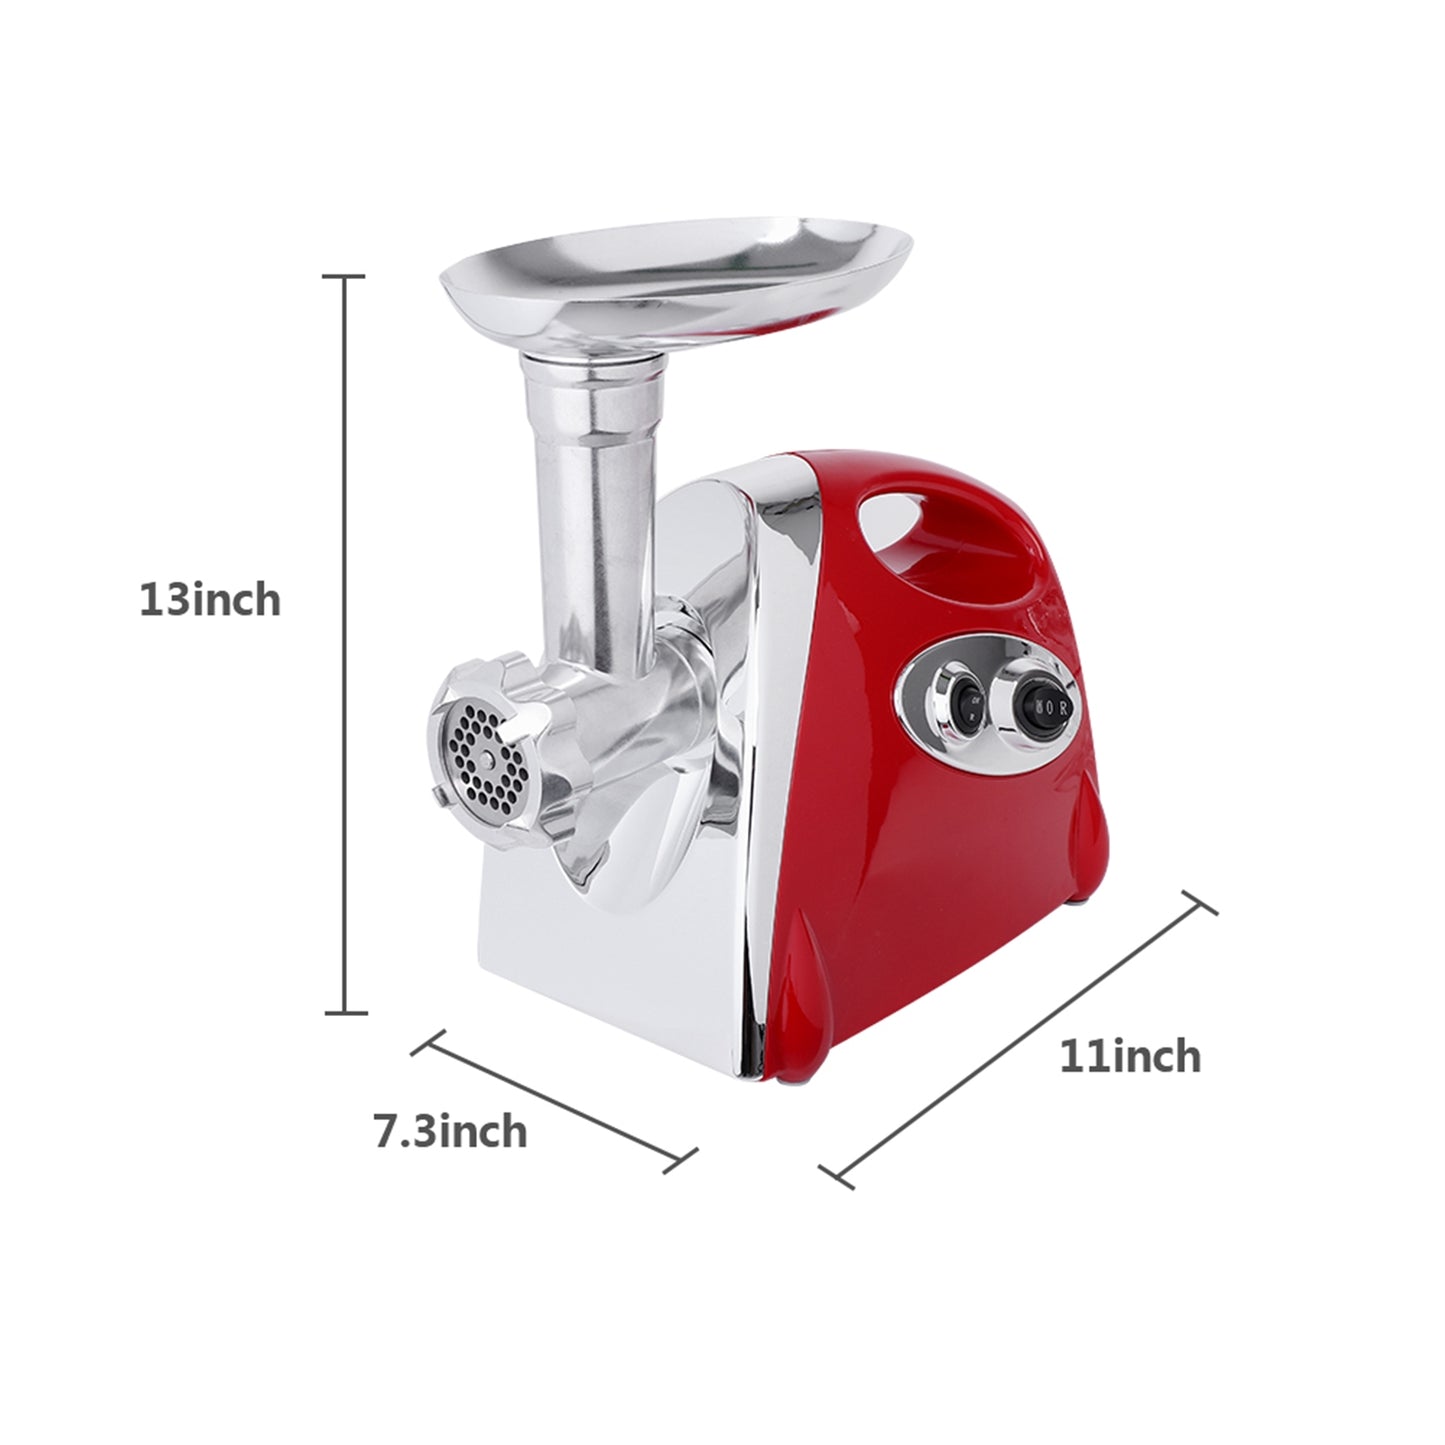 Red Electric Meat Grinder / Sausage Stuffer with handle